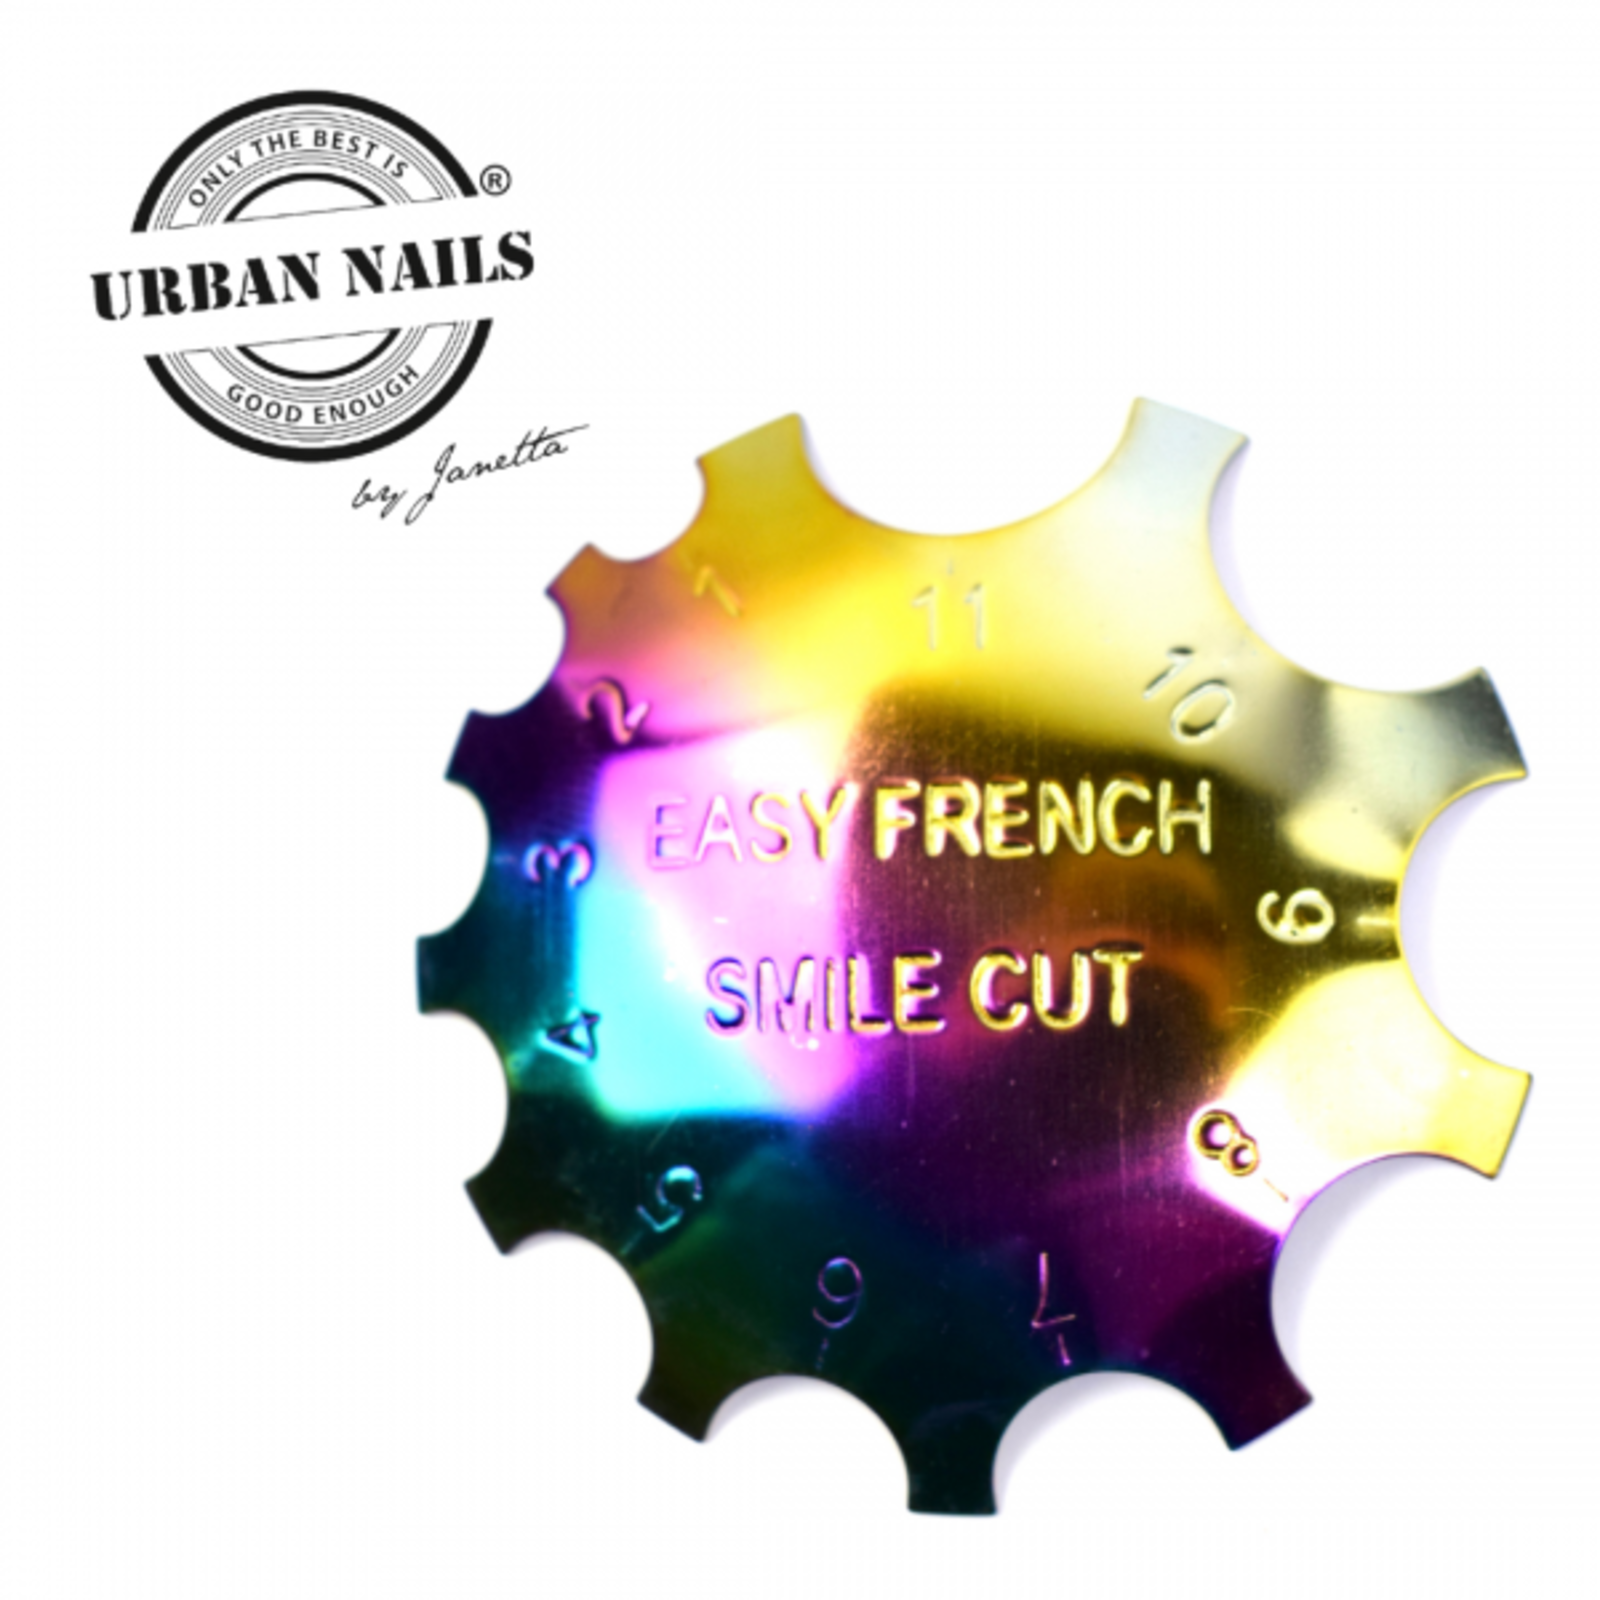 Urban nails Rainbow easy French smile cutter 01